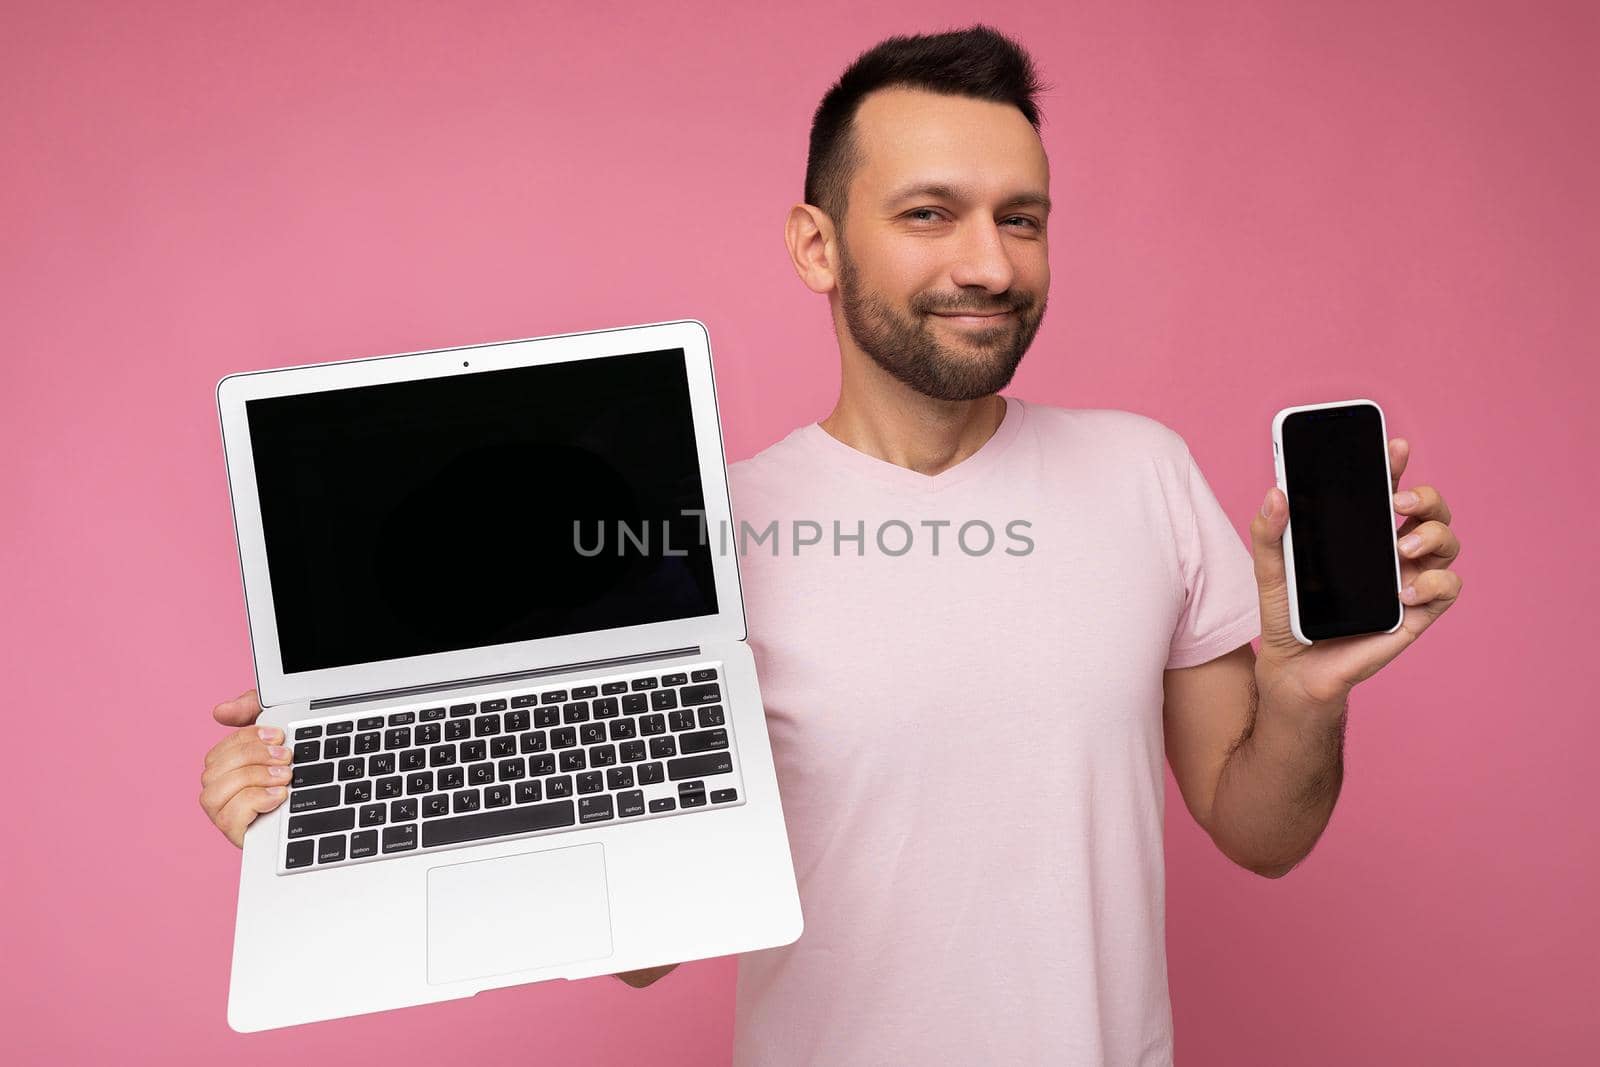 Handsome brunet man holding laptop computer and mobile phone fishily looking at camera in t-shirt on isolated pink background.